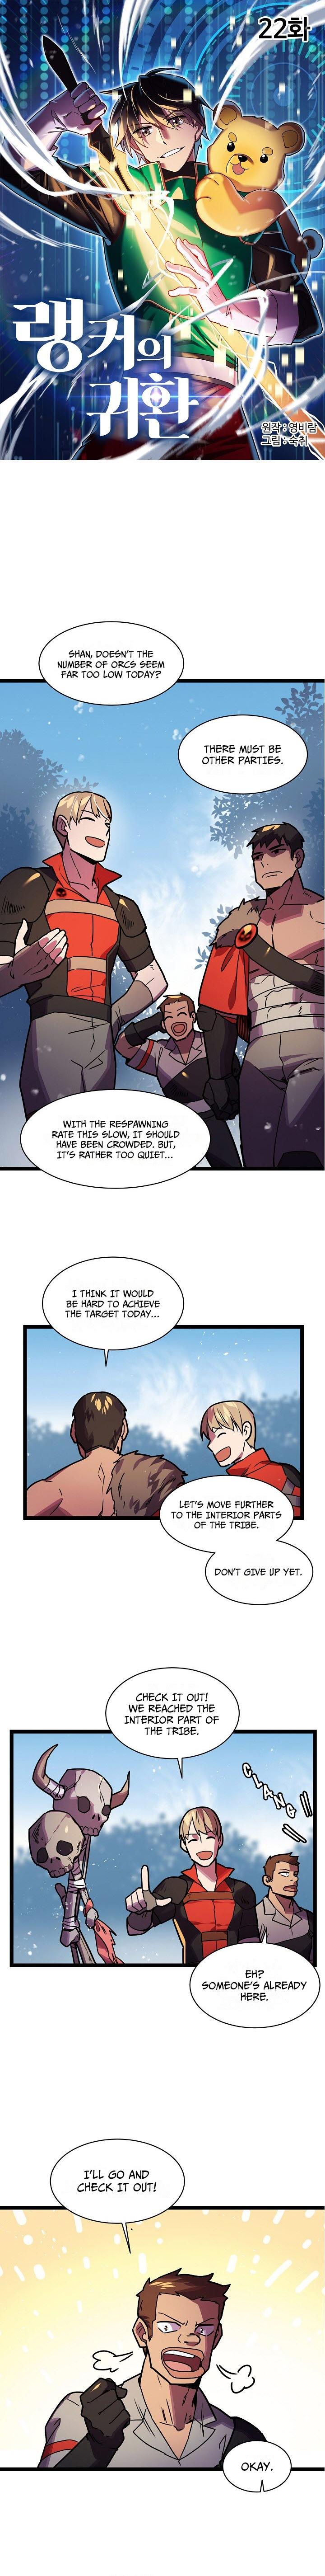 Ranker’s Return - Chapter 22 Page 2